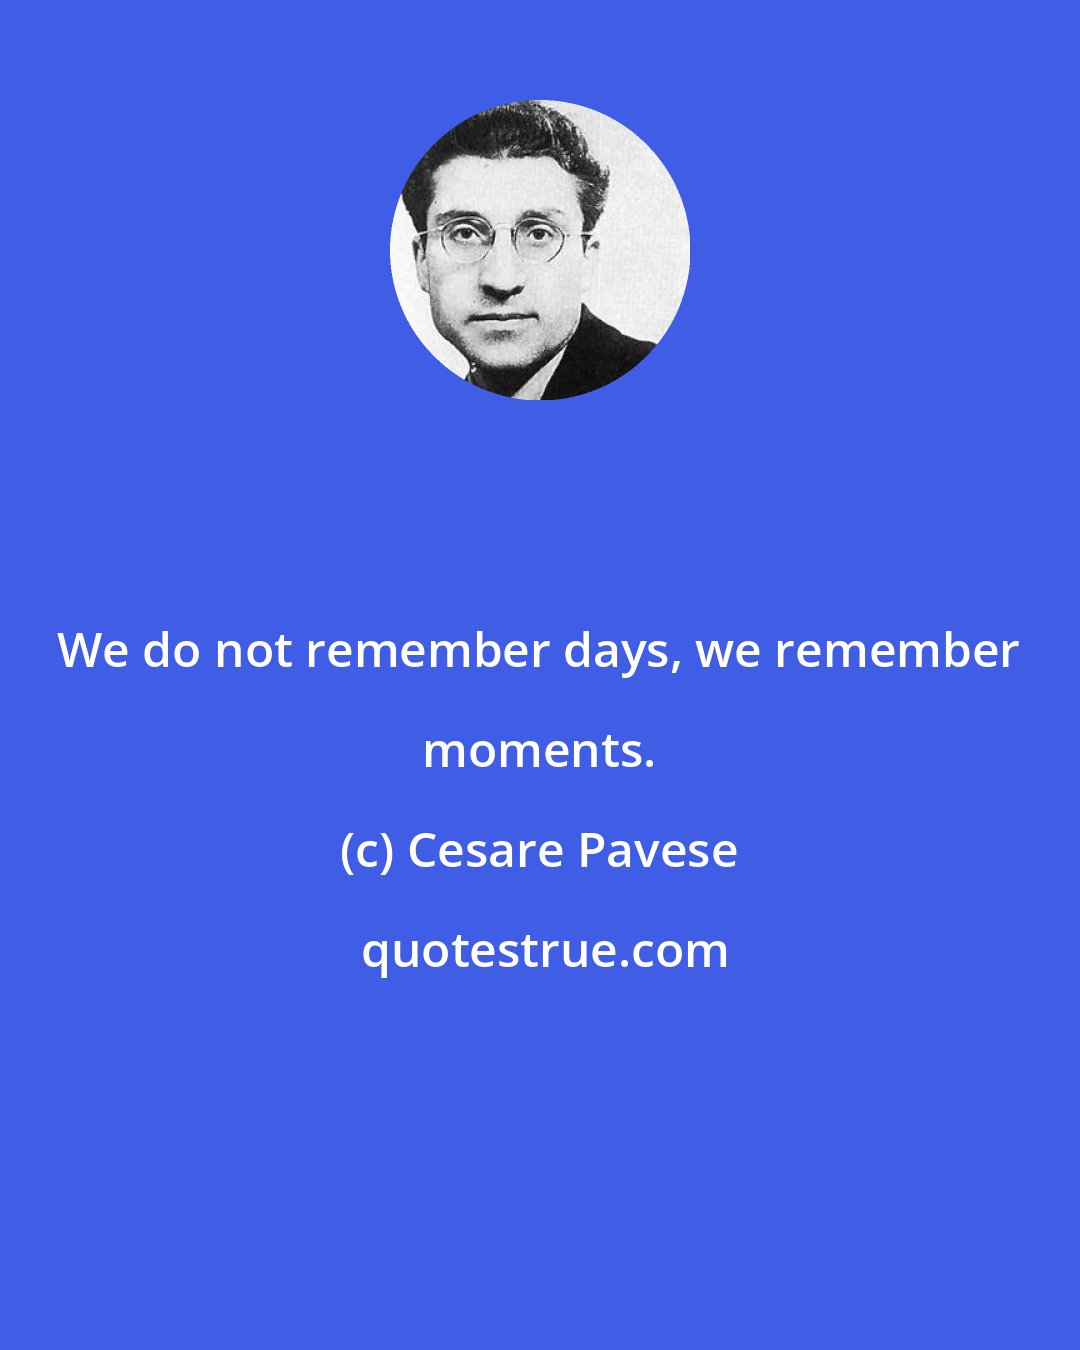 Cesare Pavese: We do not remember days, we remember moments.